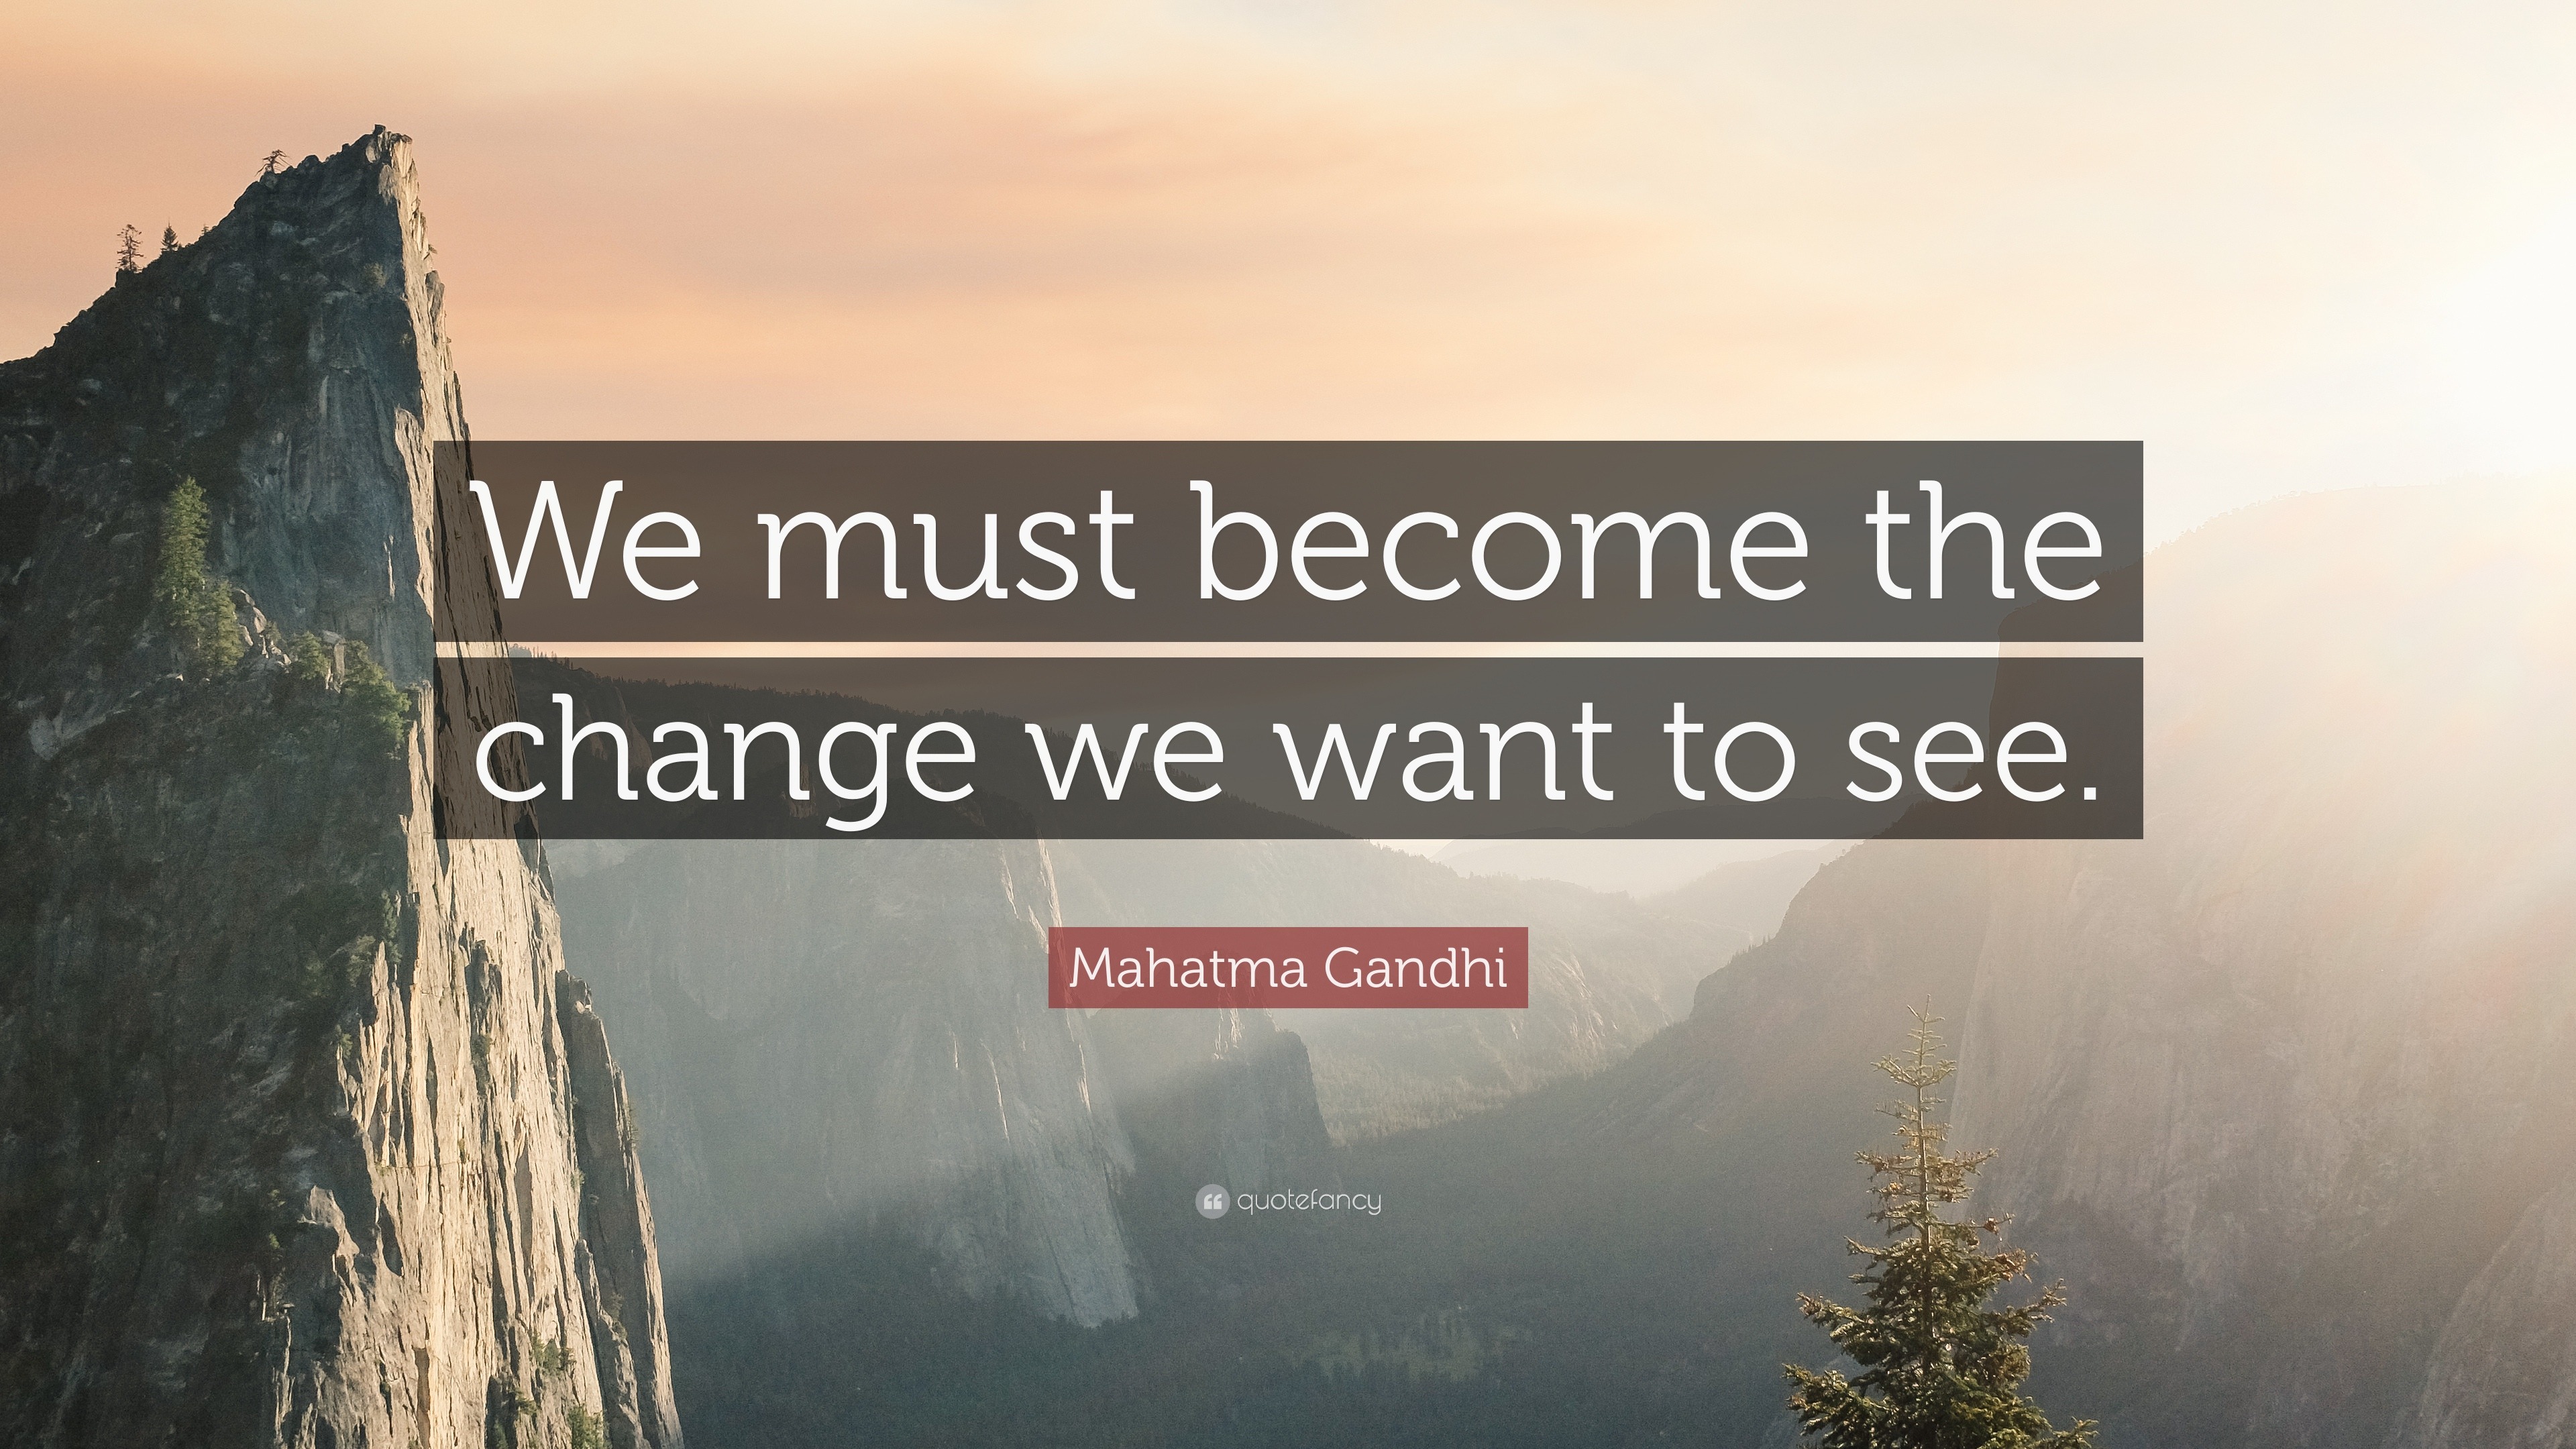 Mahatma Gandhi Quote: “We must become the change we want to see.”